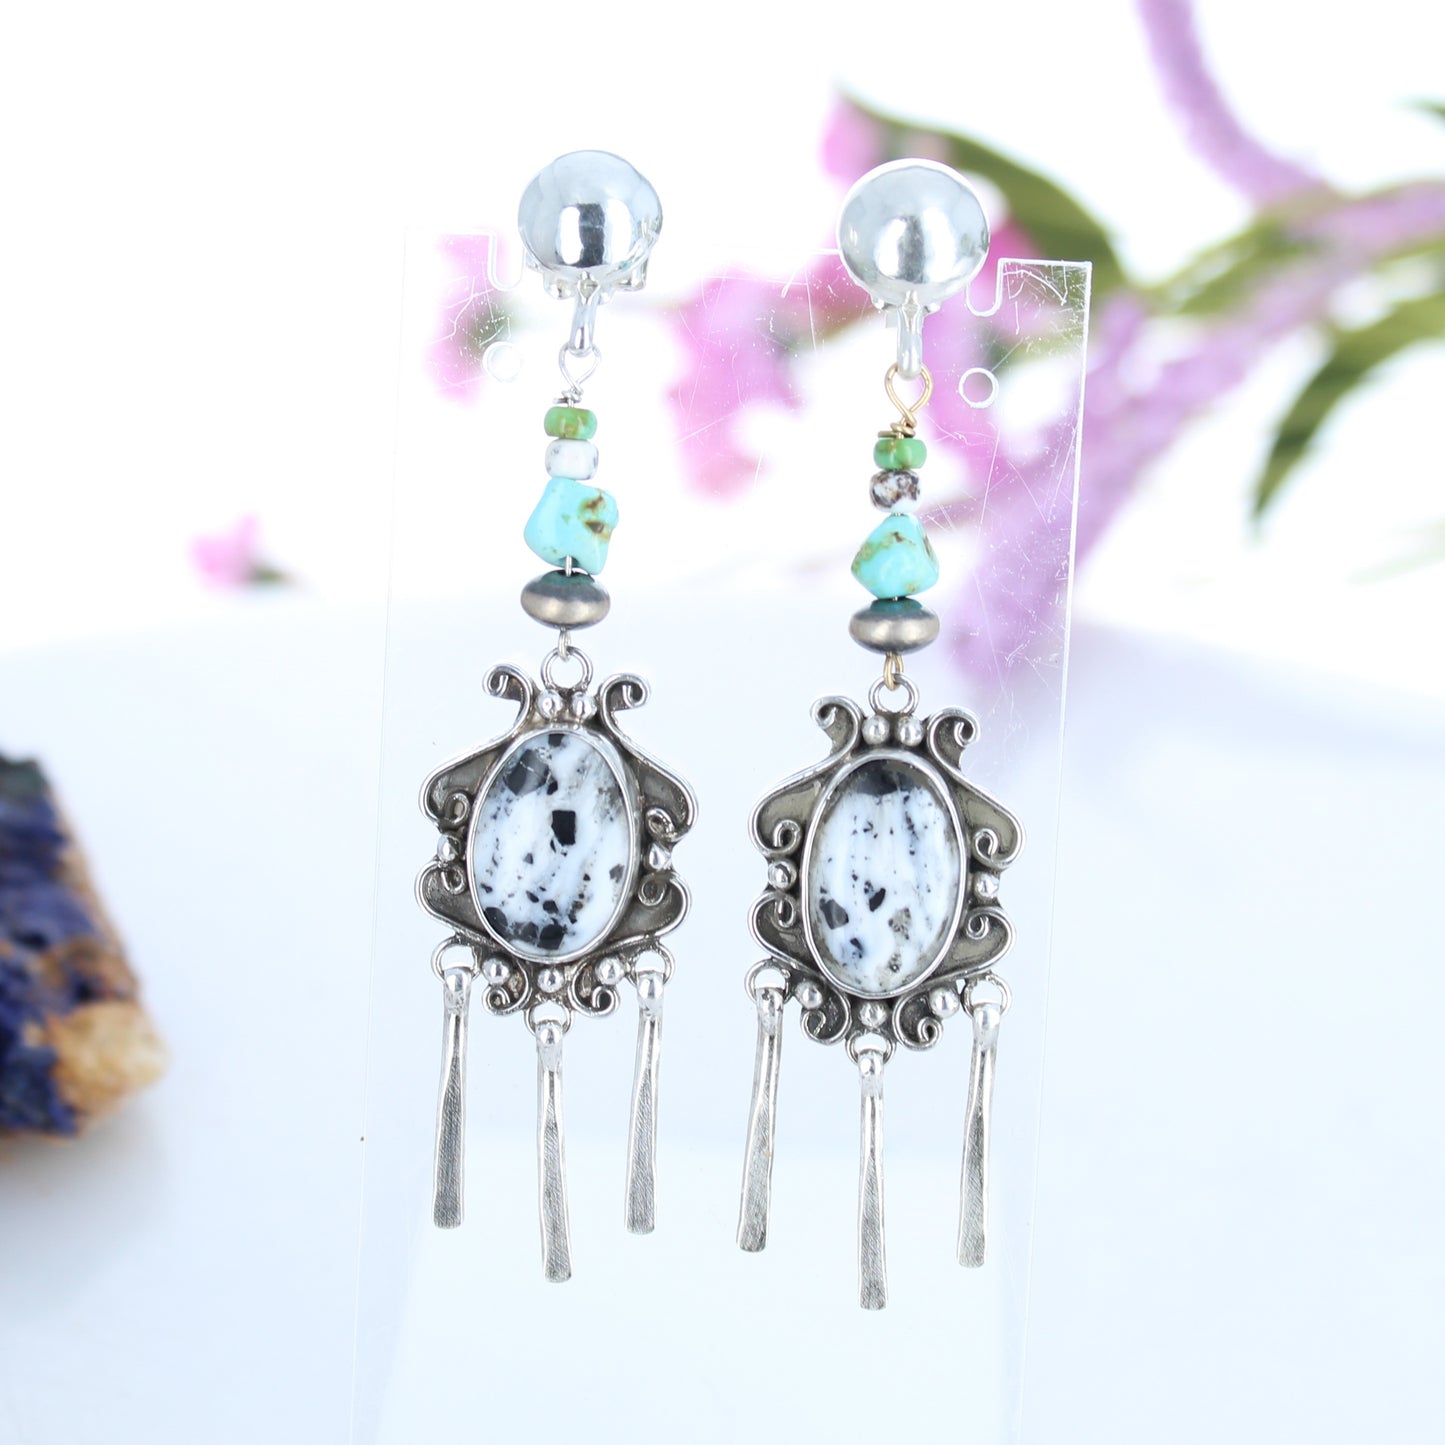 Rare White Buffalo Turquoise Earrings Sterling Scroll Design with Lone Mountain -NewWorldGems